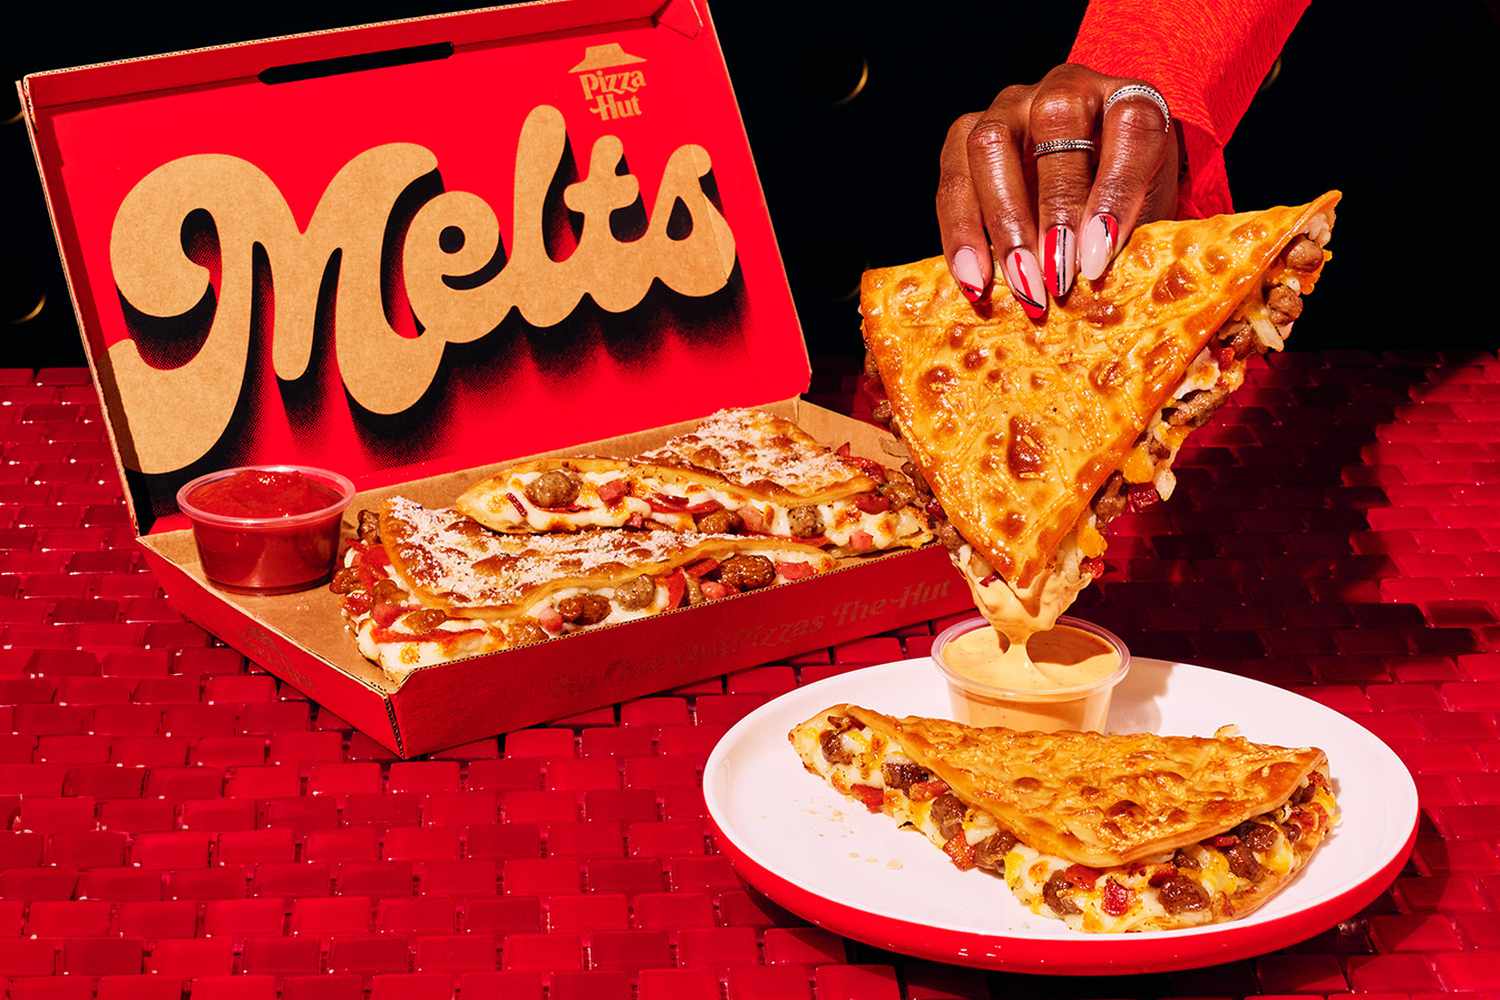 Pizza Hut's New Cheeseburger Melt The Tasty Twist Combining Burgers and Pizza in One Bite